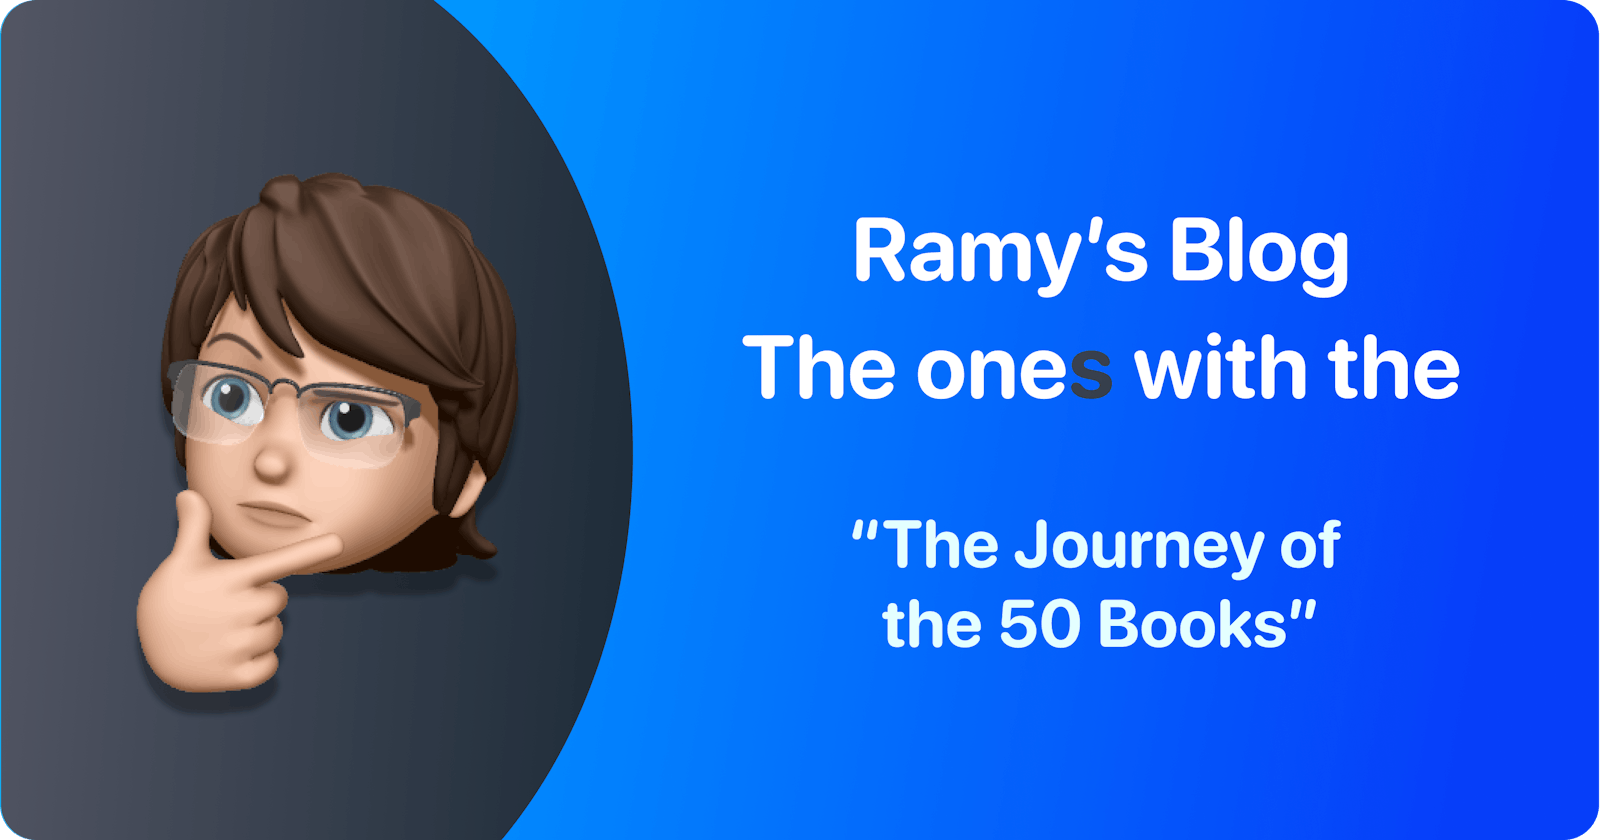 The Journey of the 50 Books